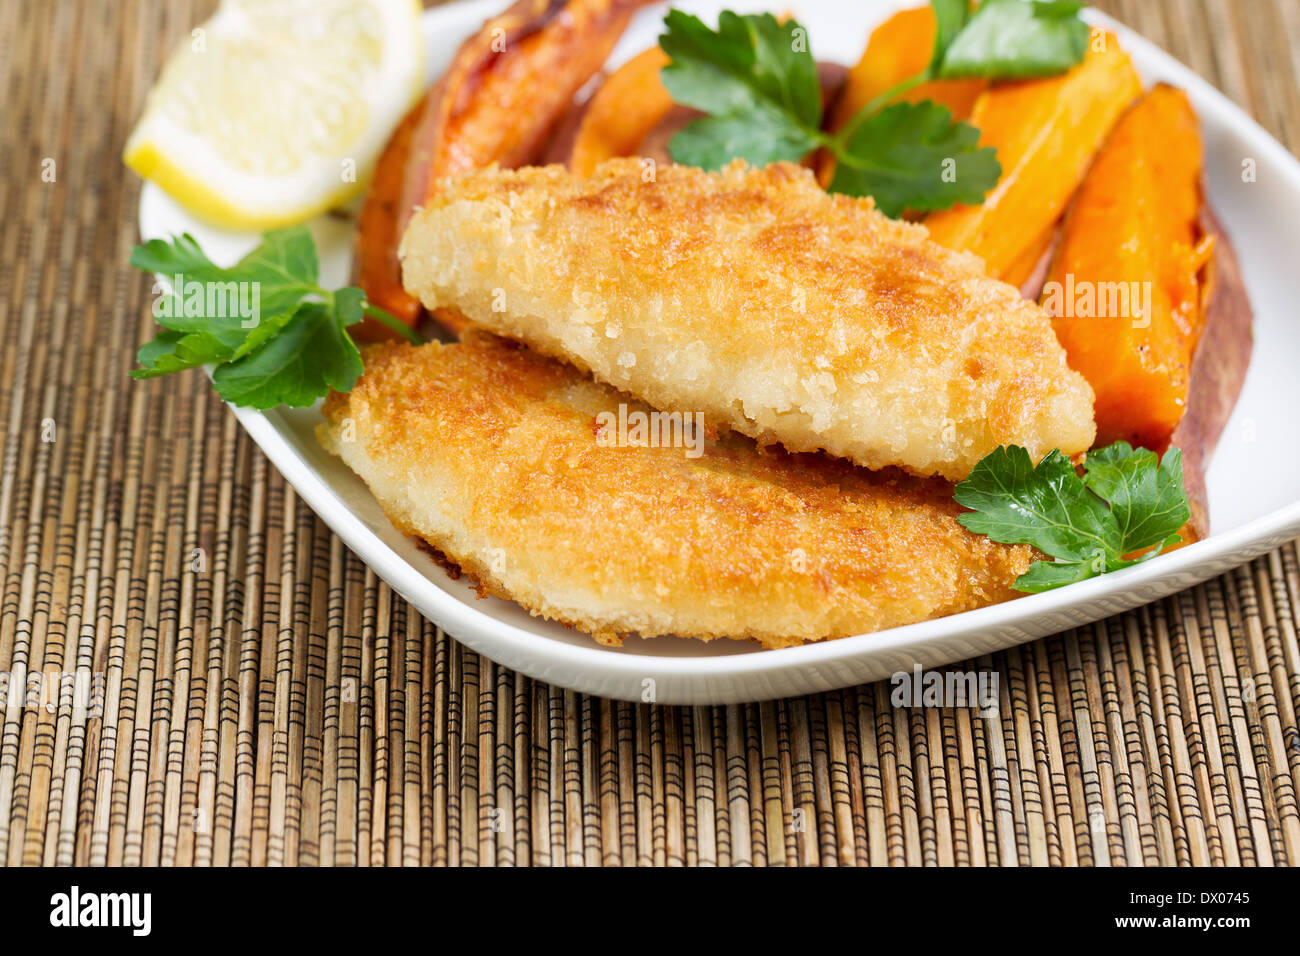 Closeup horizontal of golden crisp fried fish and yams in white plate with bamboo place mat underneath Stock Photo